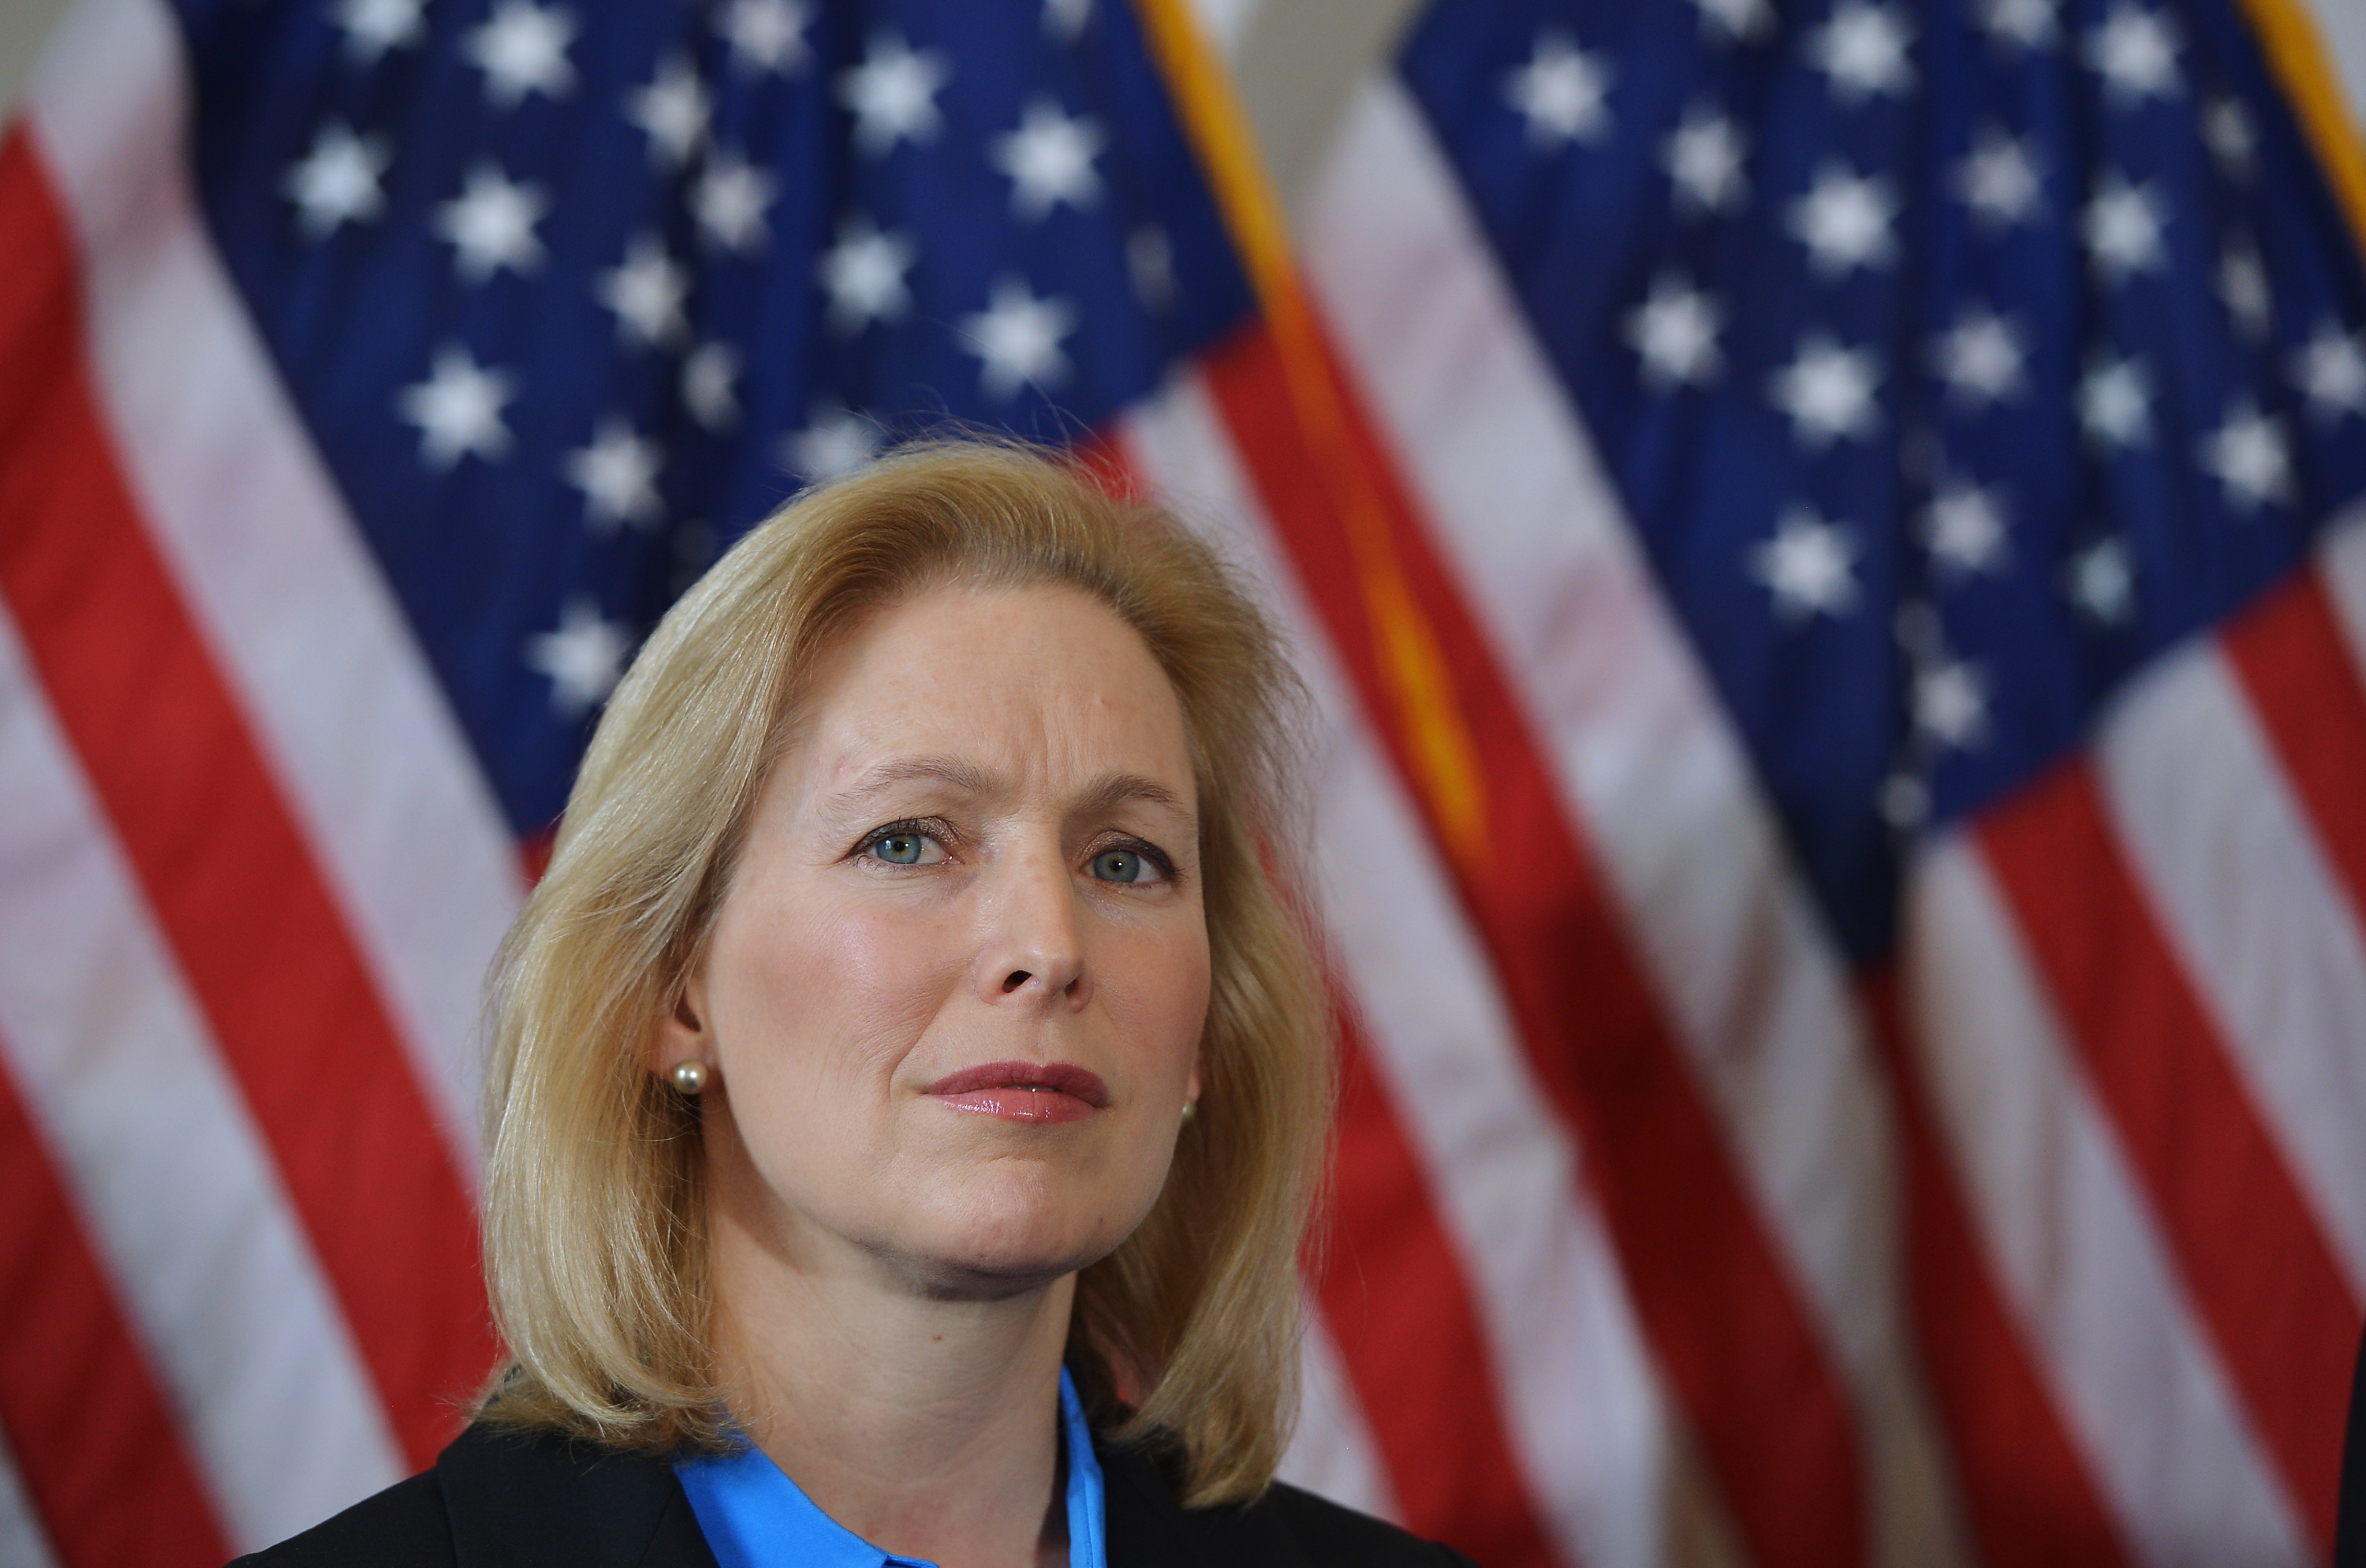 Senator Kirsten Gillibrand attends a press conference in the Russell Senate Office Building on Capitol Hill in Washington, Feb. 6, 2014.